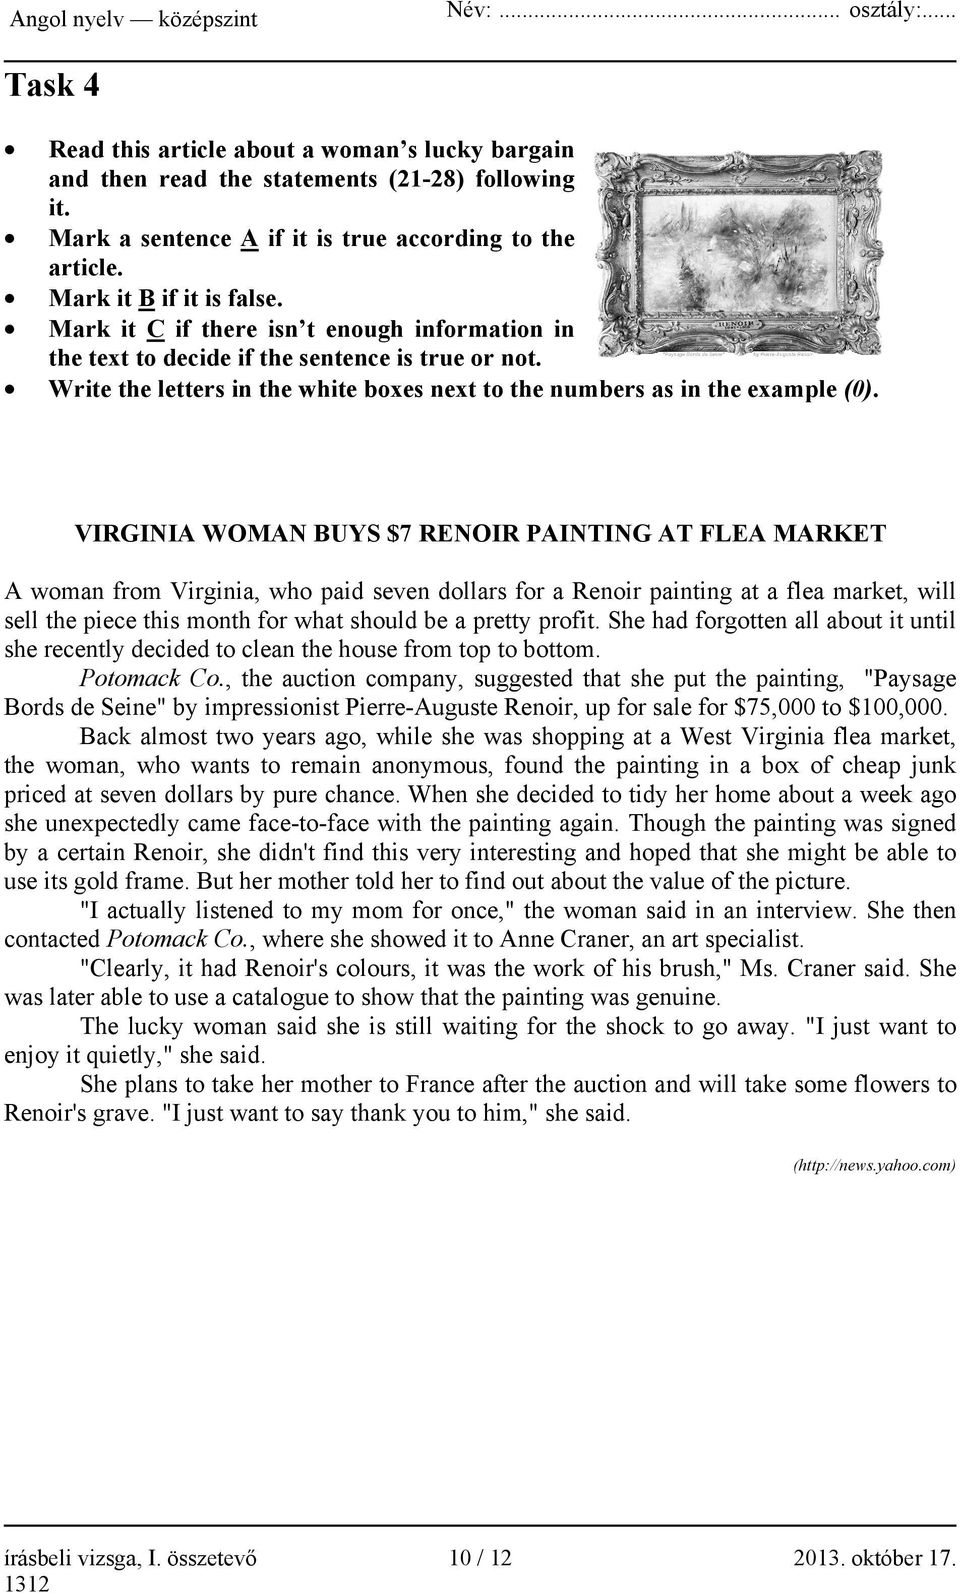 VIRGINIA WOMAN BUYS $7 RENOIR PAINTING AT FLEA MARKET A woman from Virginia, who paid seven dollars for a Renoir painting at a flea market, will sell the piece this month for what should be a pretty